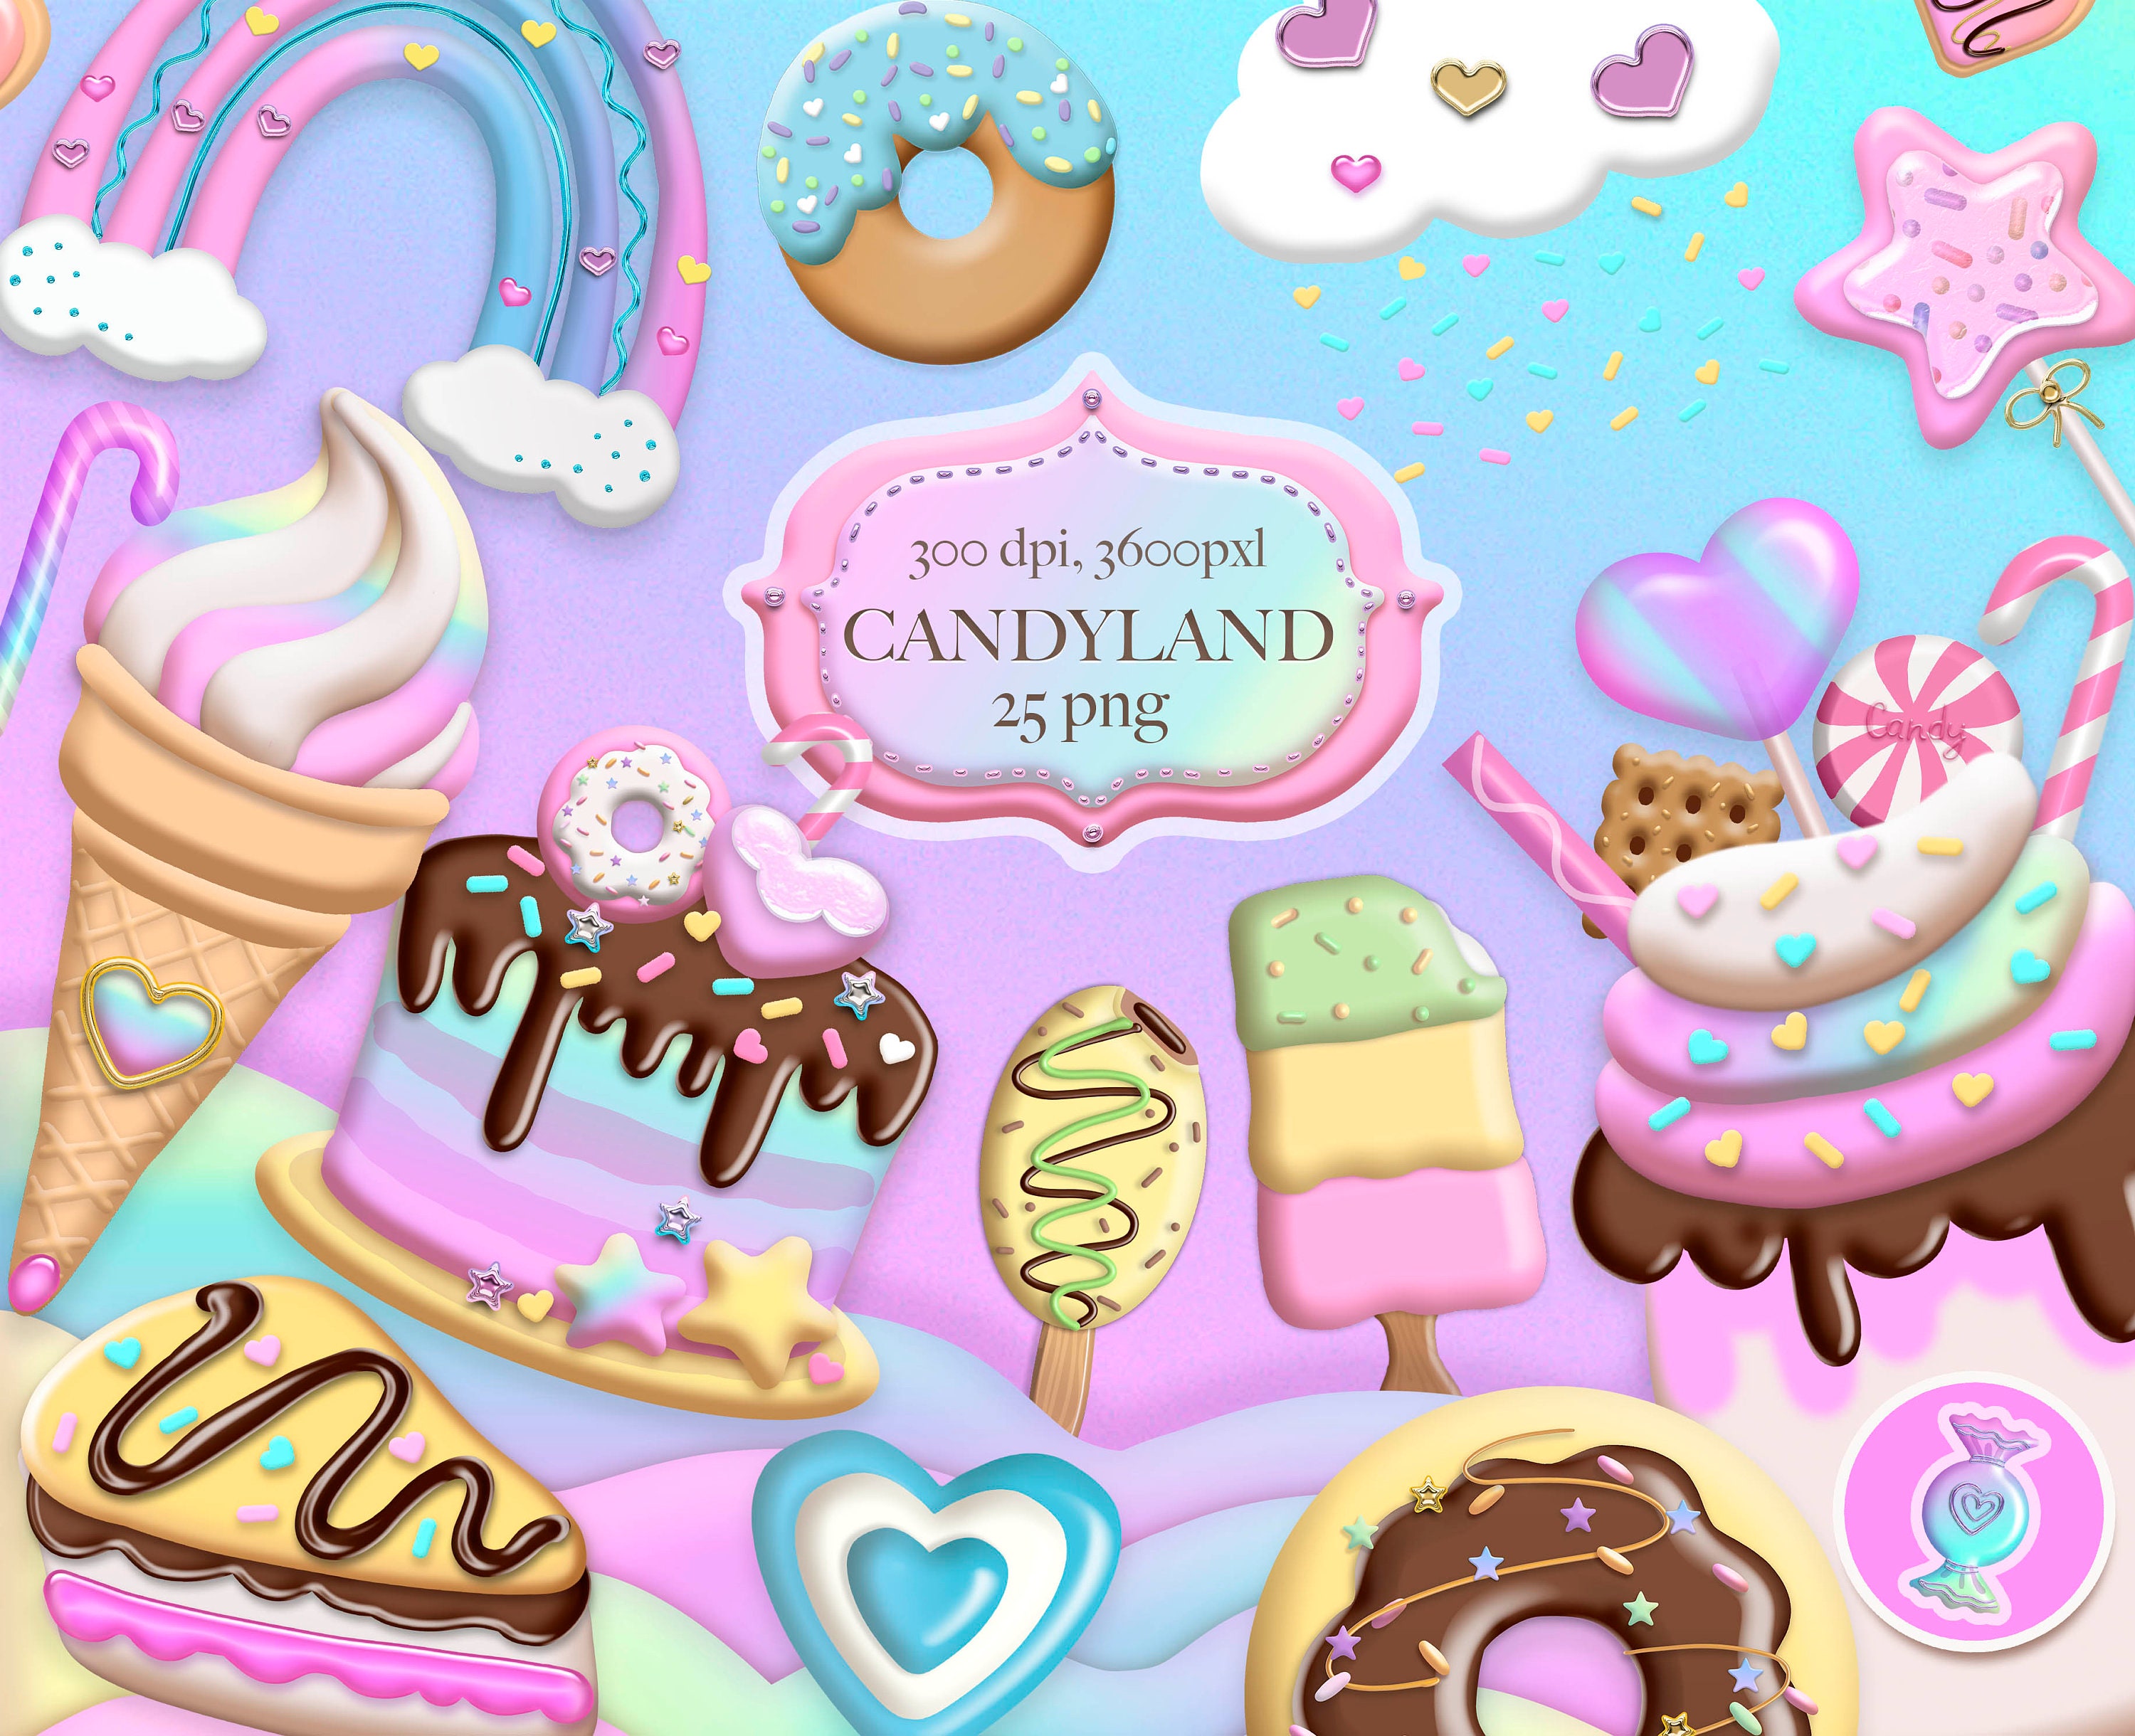 Pin by Francistama on Camisetas estampadas in 2023  Louis vuitton iphone  wallpaper, Candy land birthday party, Candyland birthday